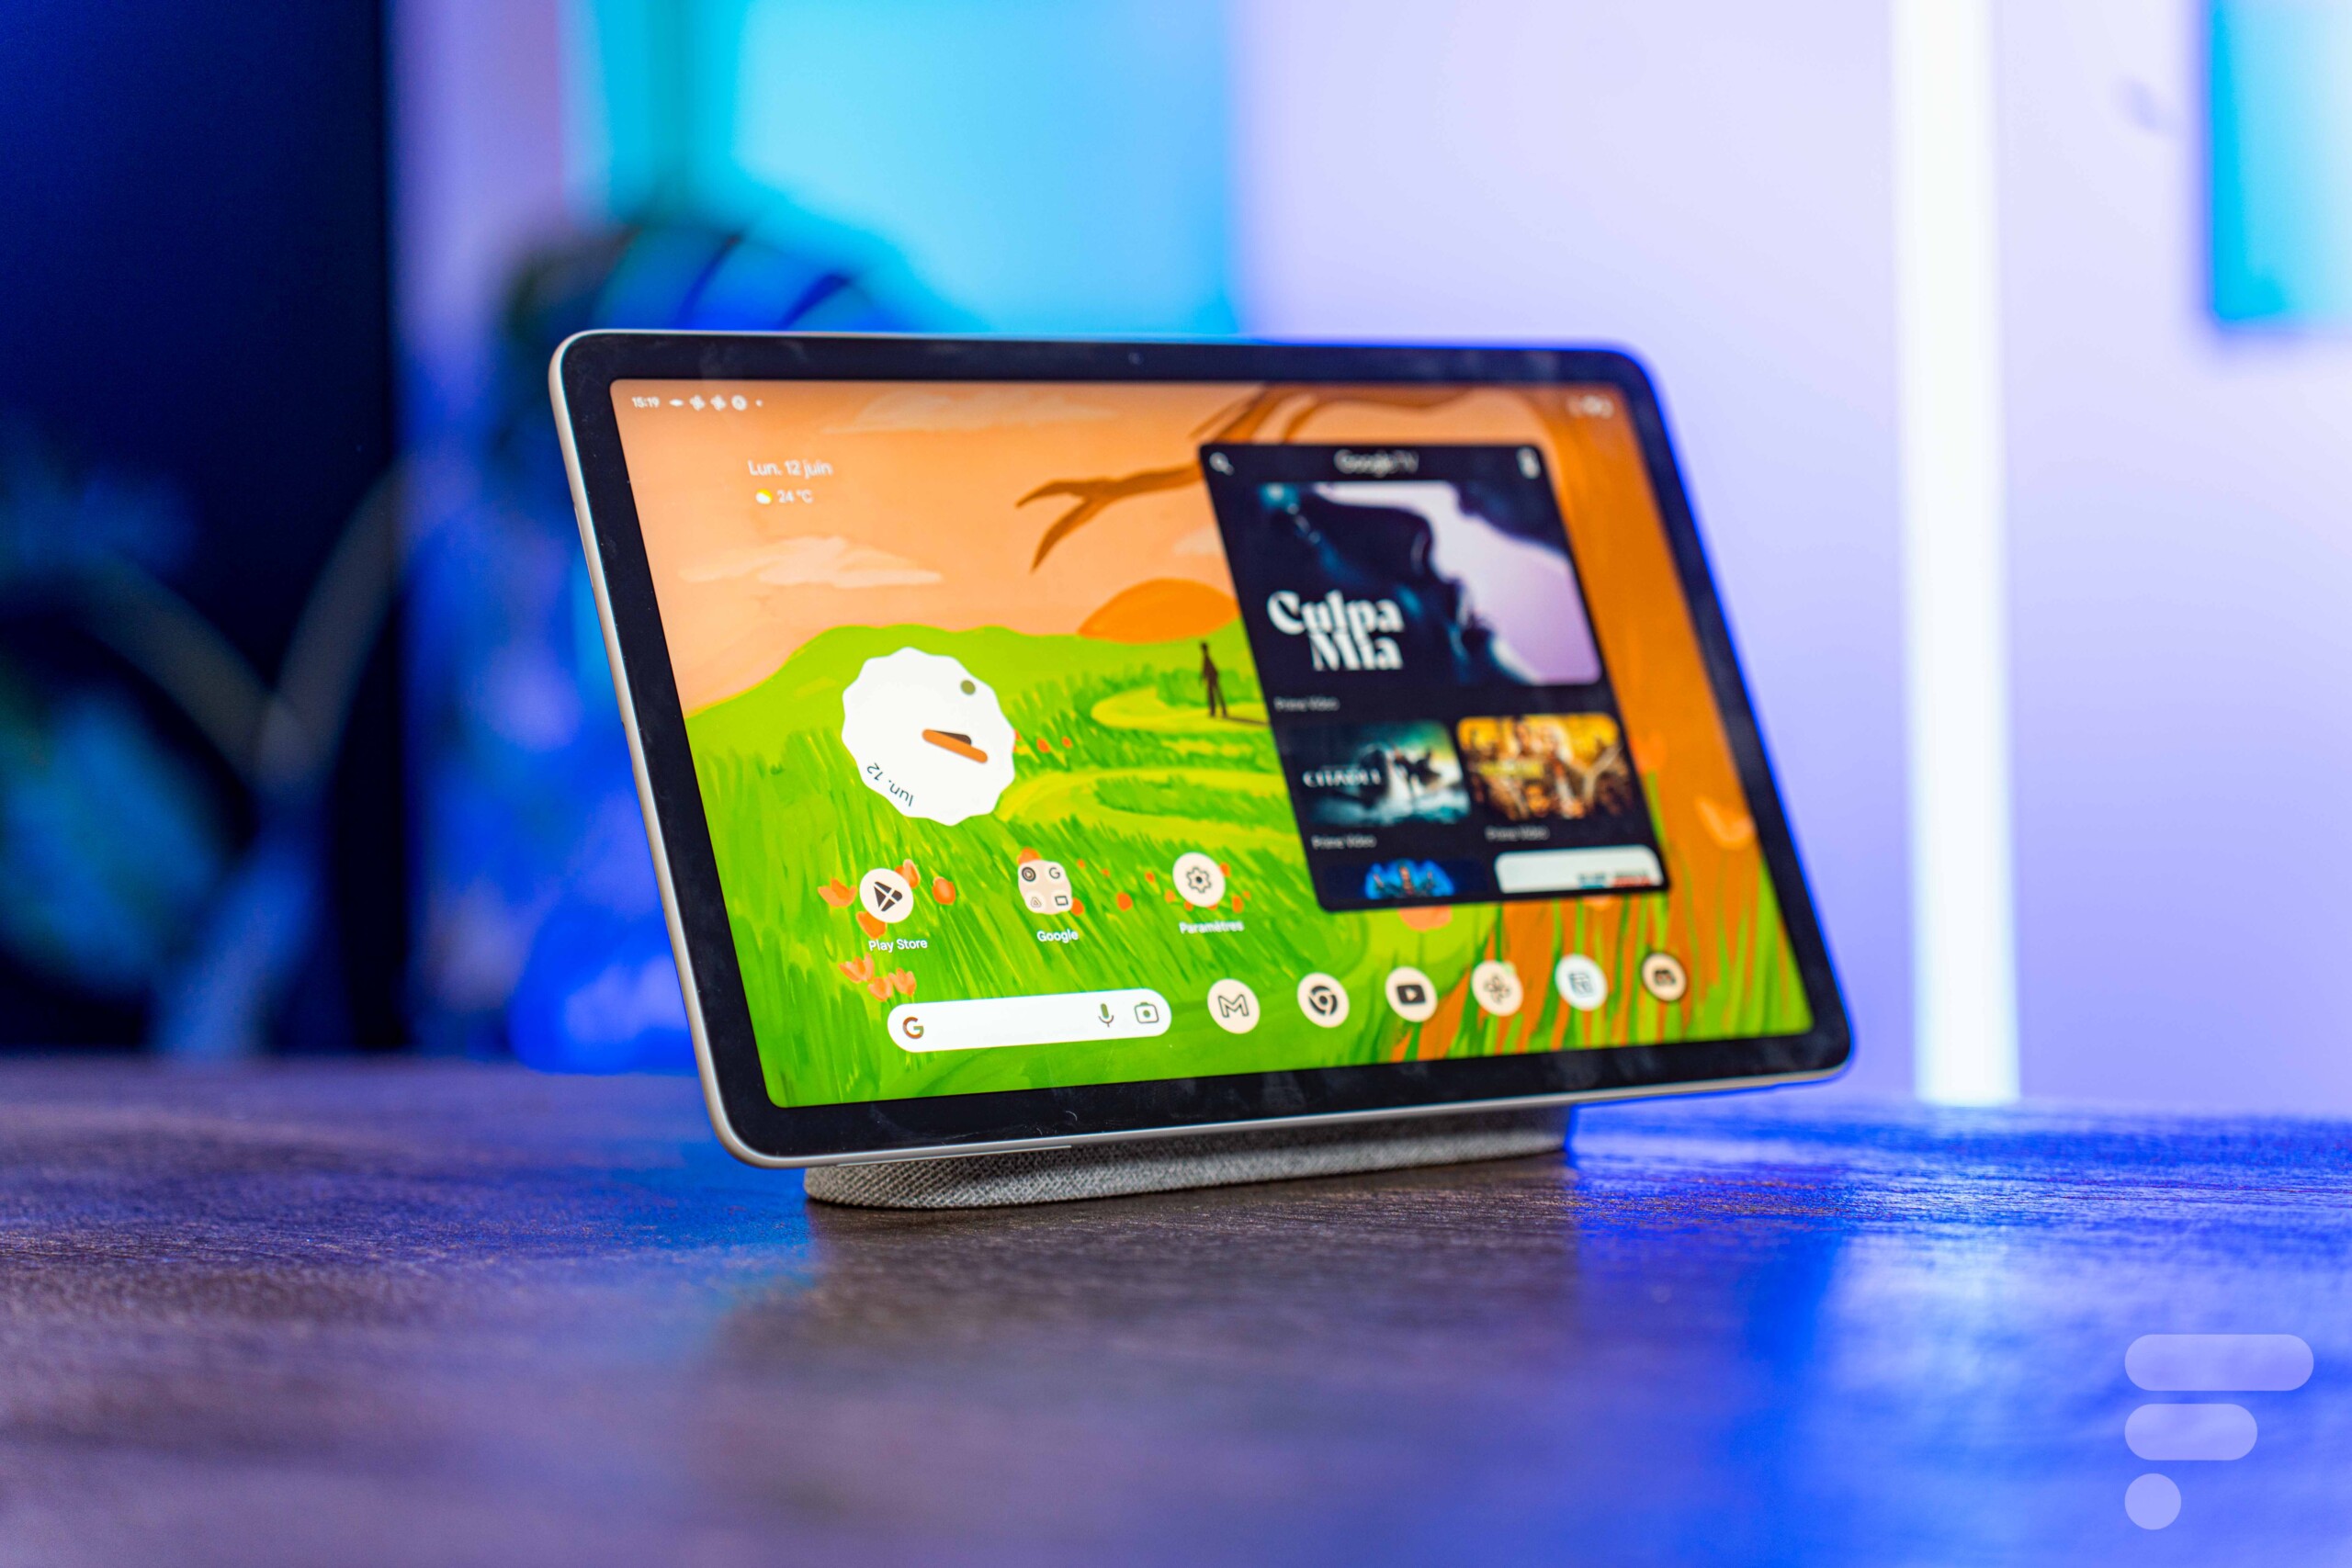 Why Google’s Pixel tablet is getting smarter by lowering its price